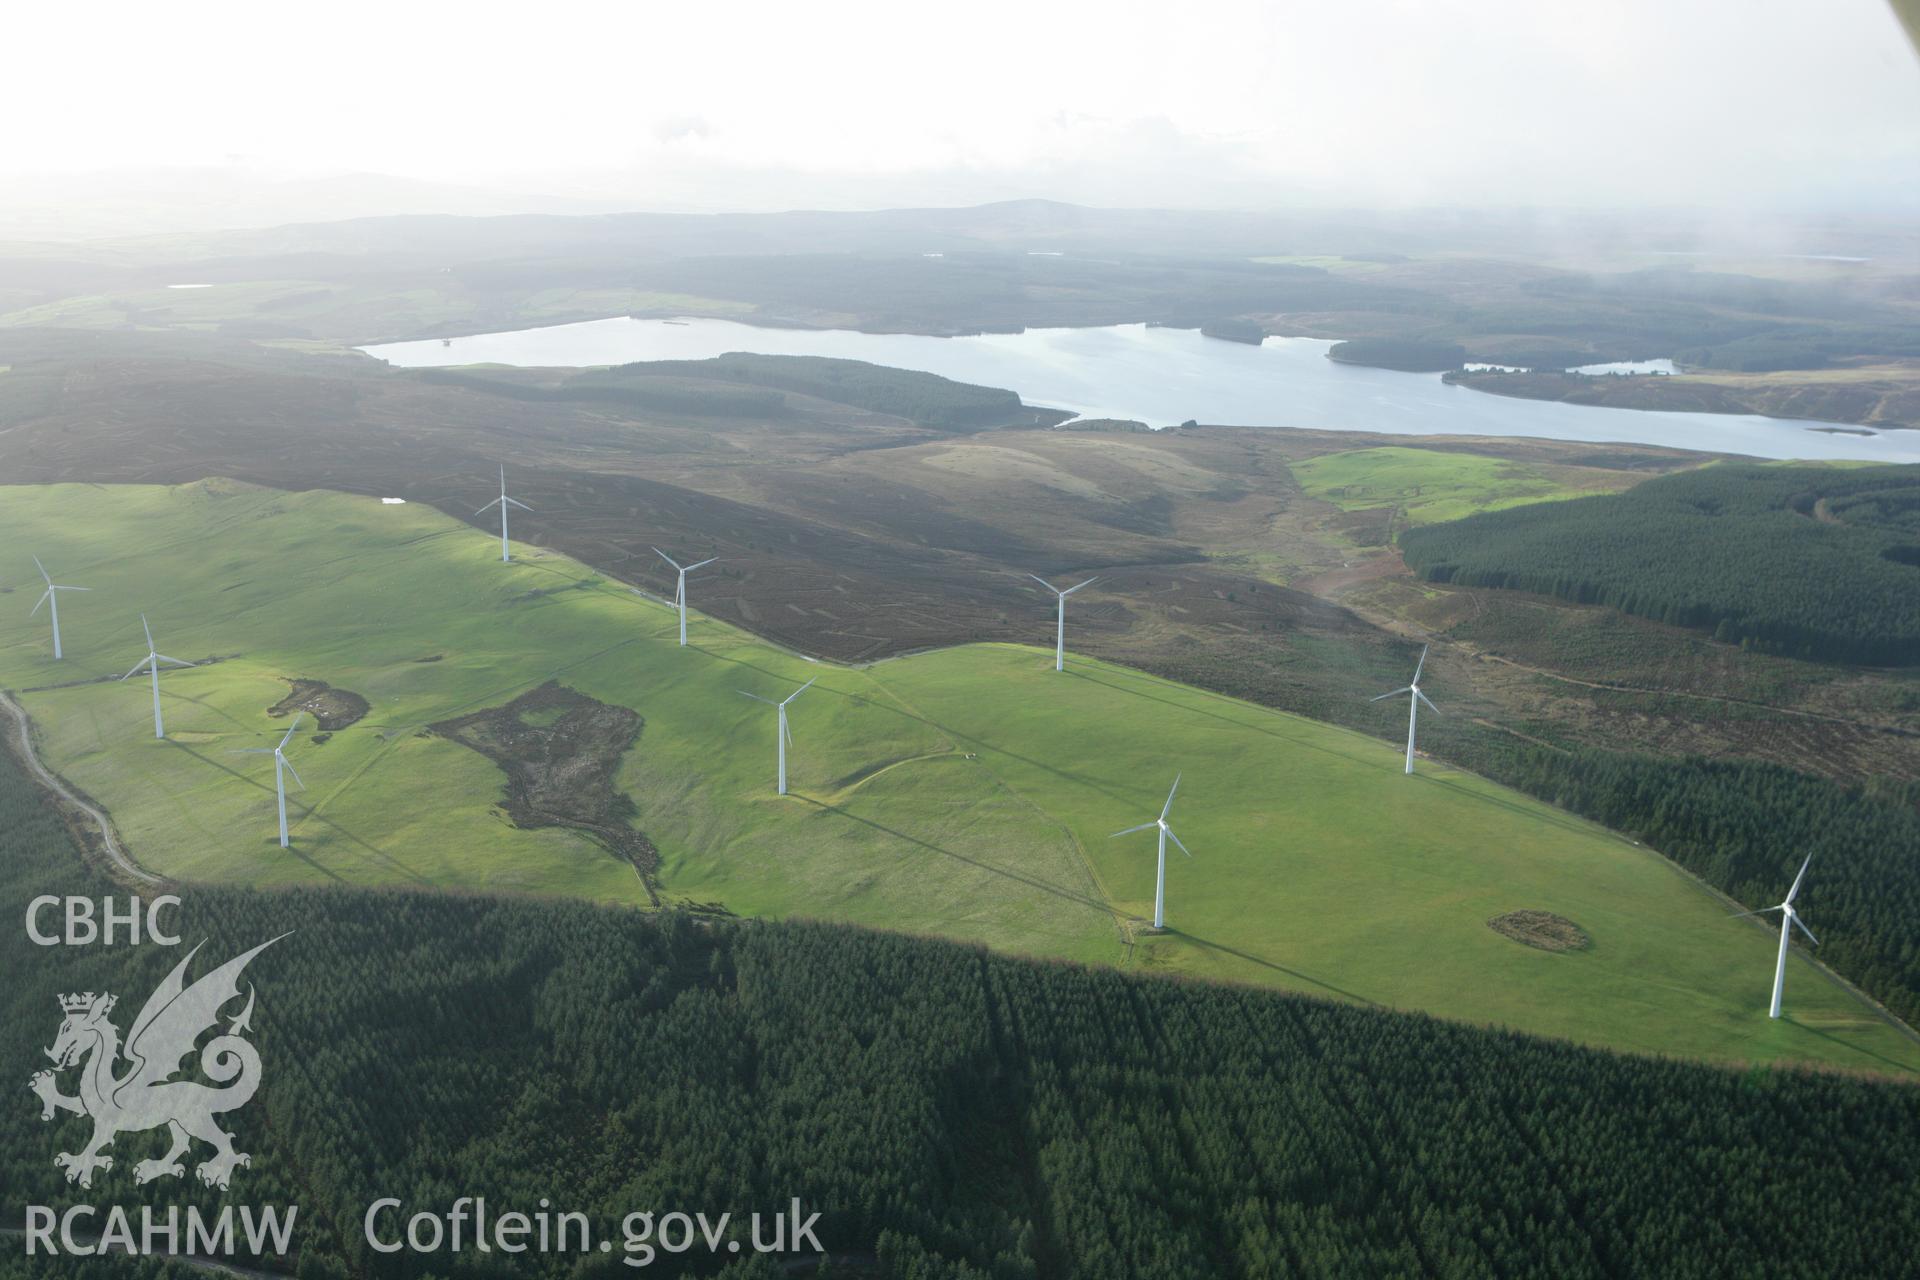 RCAHMW colour oblique aerial photograph of Foel Goch Windfarm. Taken on 10 December 2009 by Toby Driver